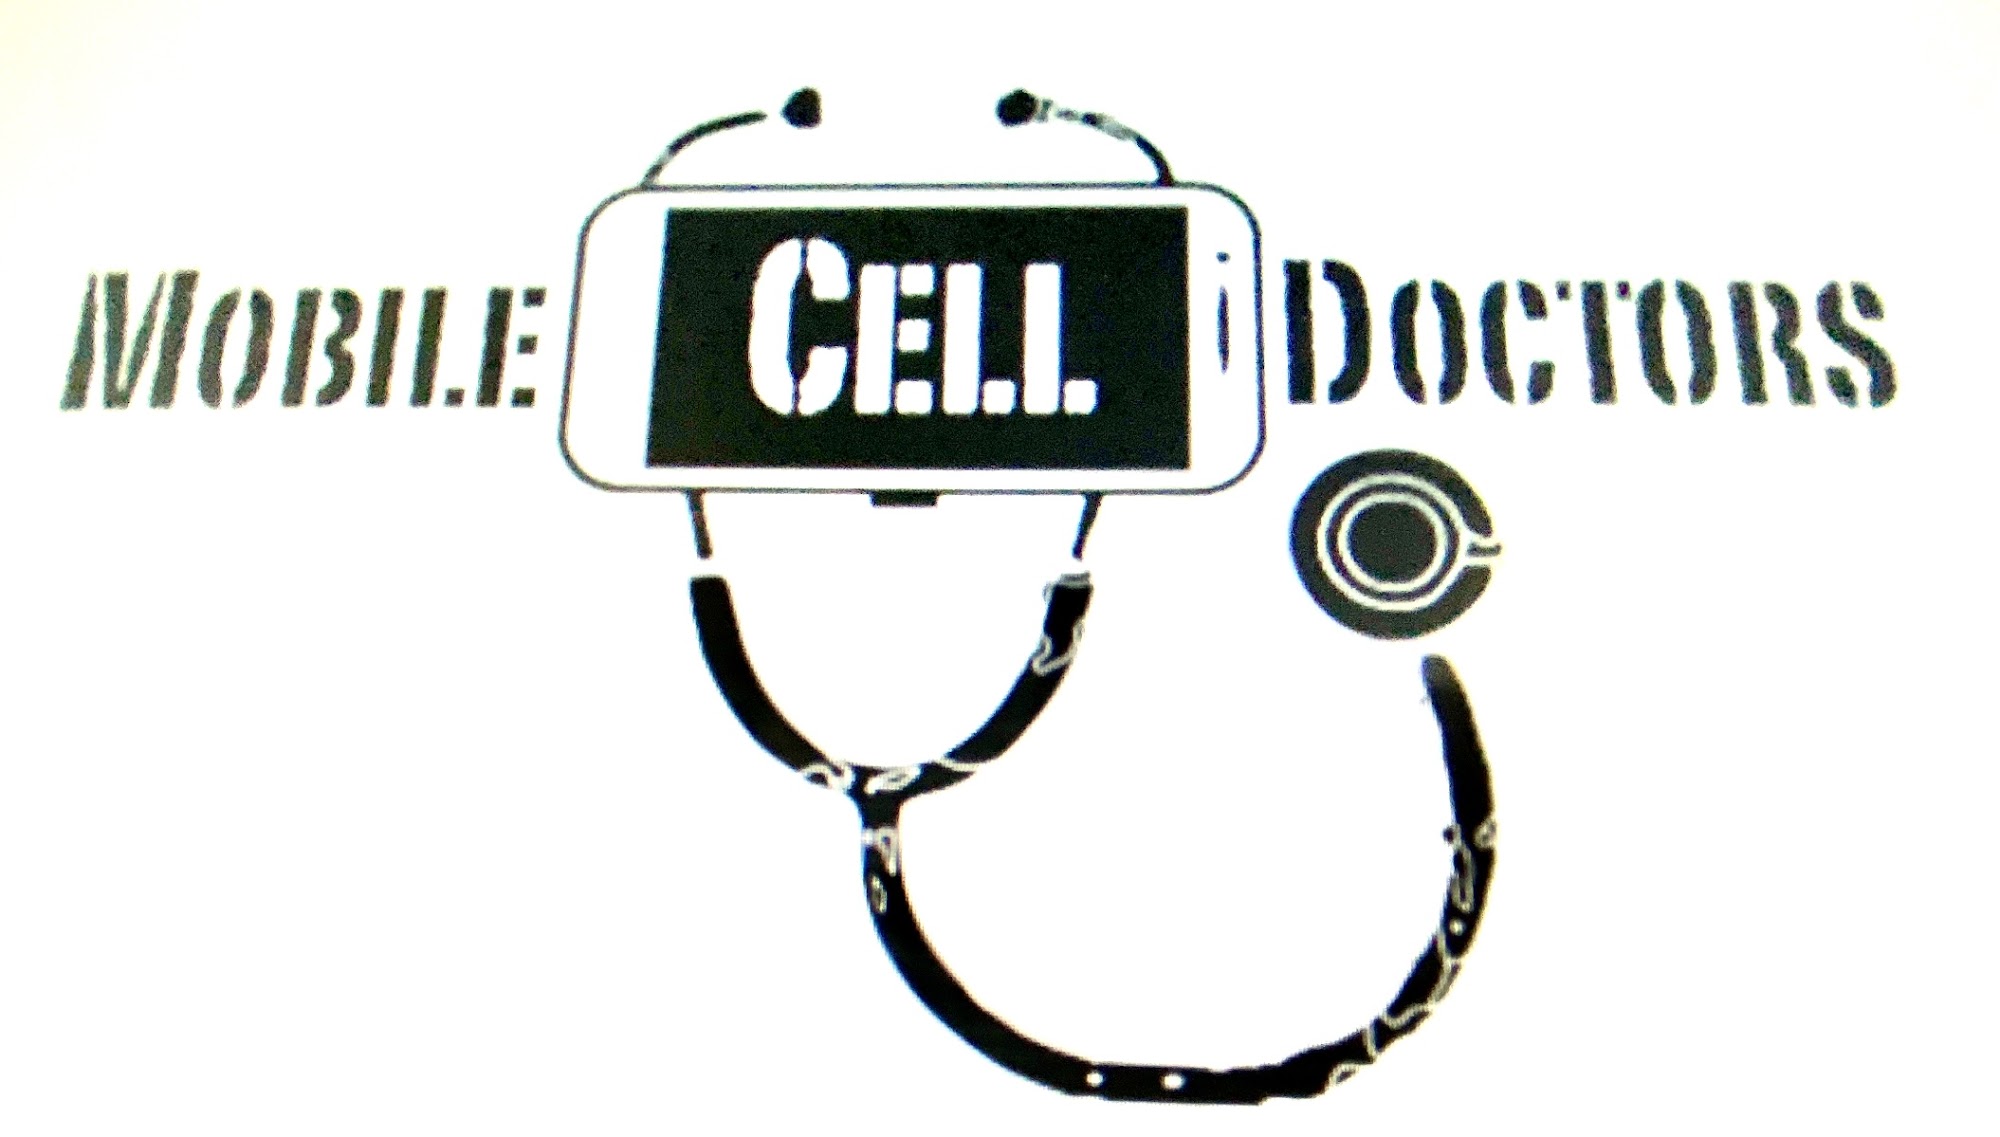 Mobile Cell Doctors 1521 Morning Dove Way, Clover South Carolina 29710